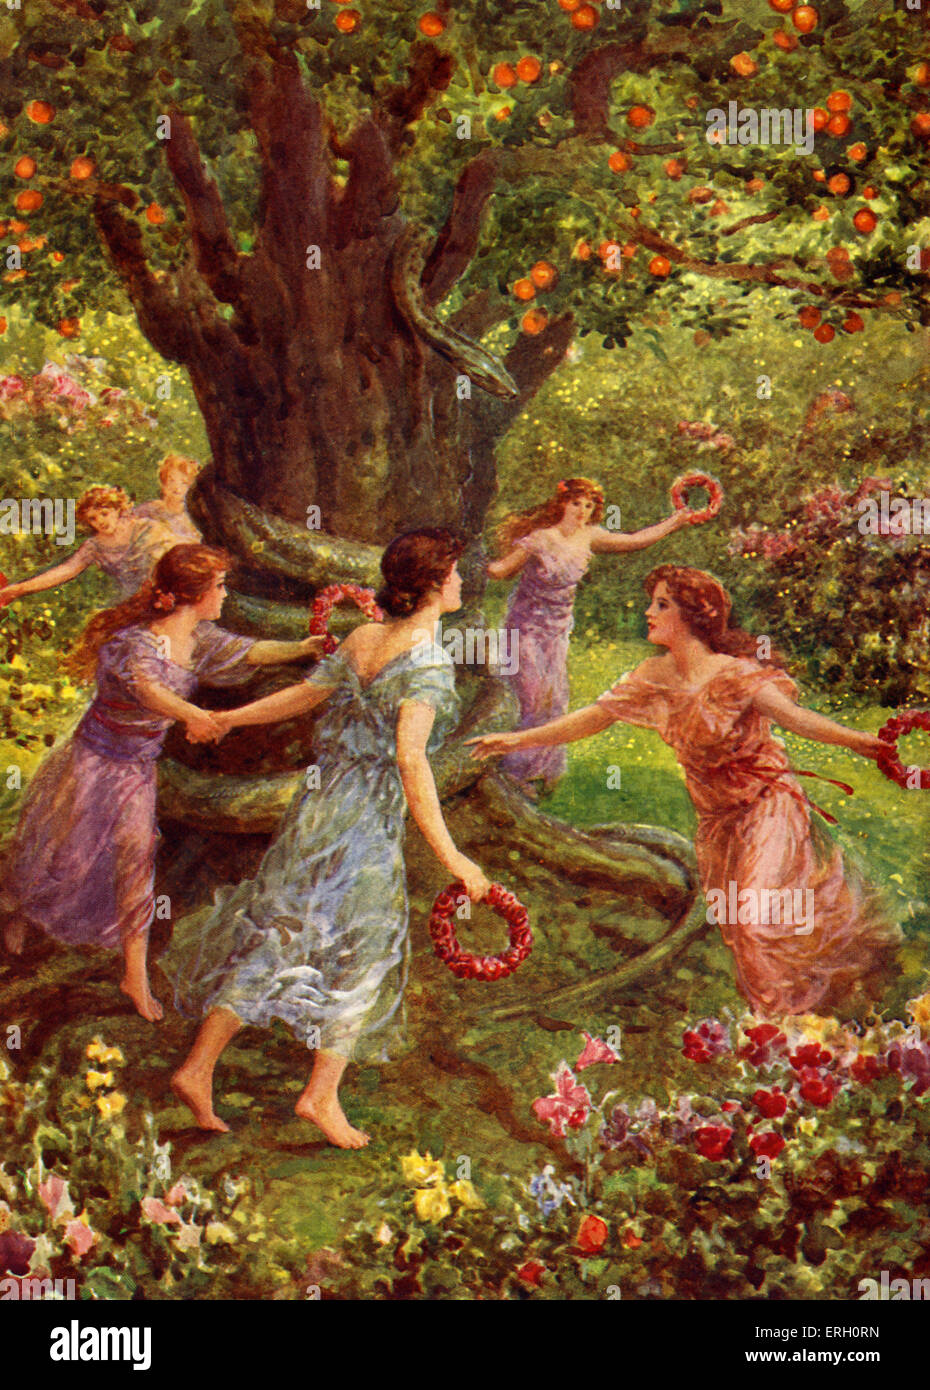 How Perseus slew the Gorgon - caption reads: 'Perseus saw them dancing around the charmed tree'. From 'The Heroes or Greek Fairy Tales' by Charles Kingsley, English novelist (June 12, 1819 – January 23, 1875). Illustration by Howard Davie. Stock Photo